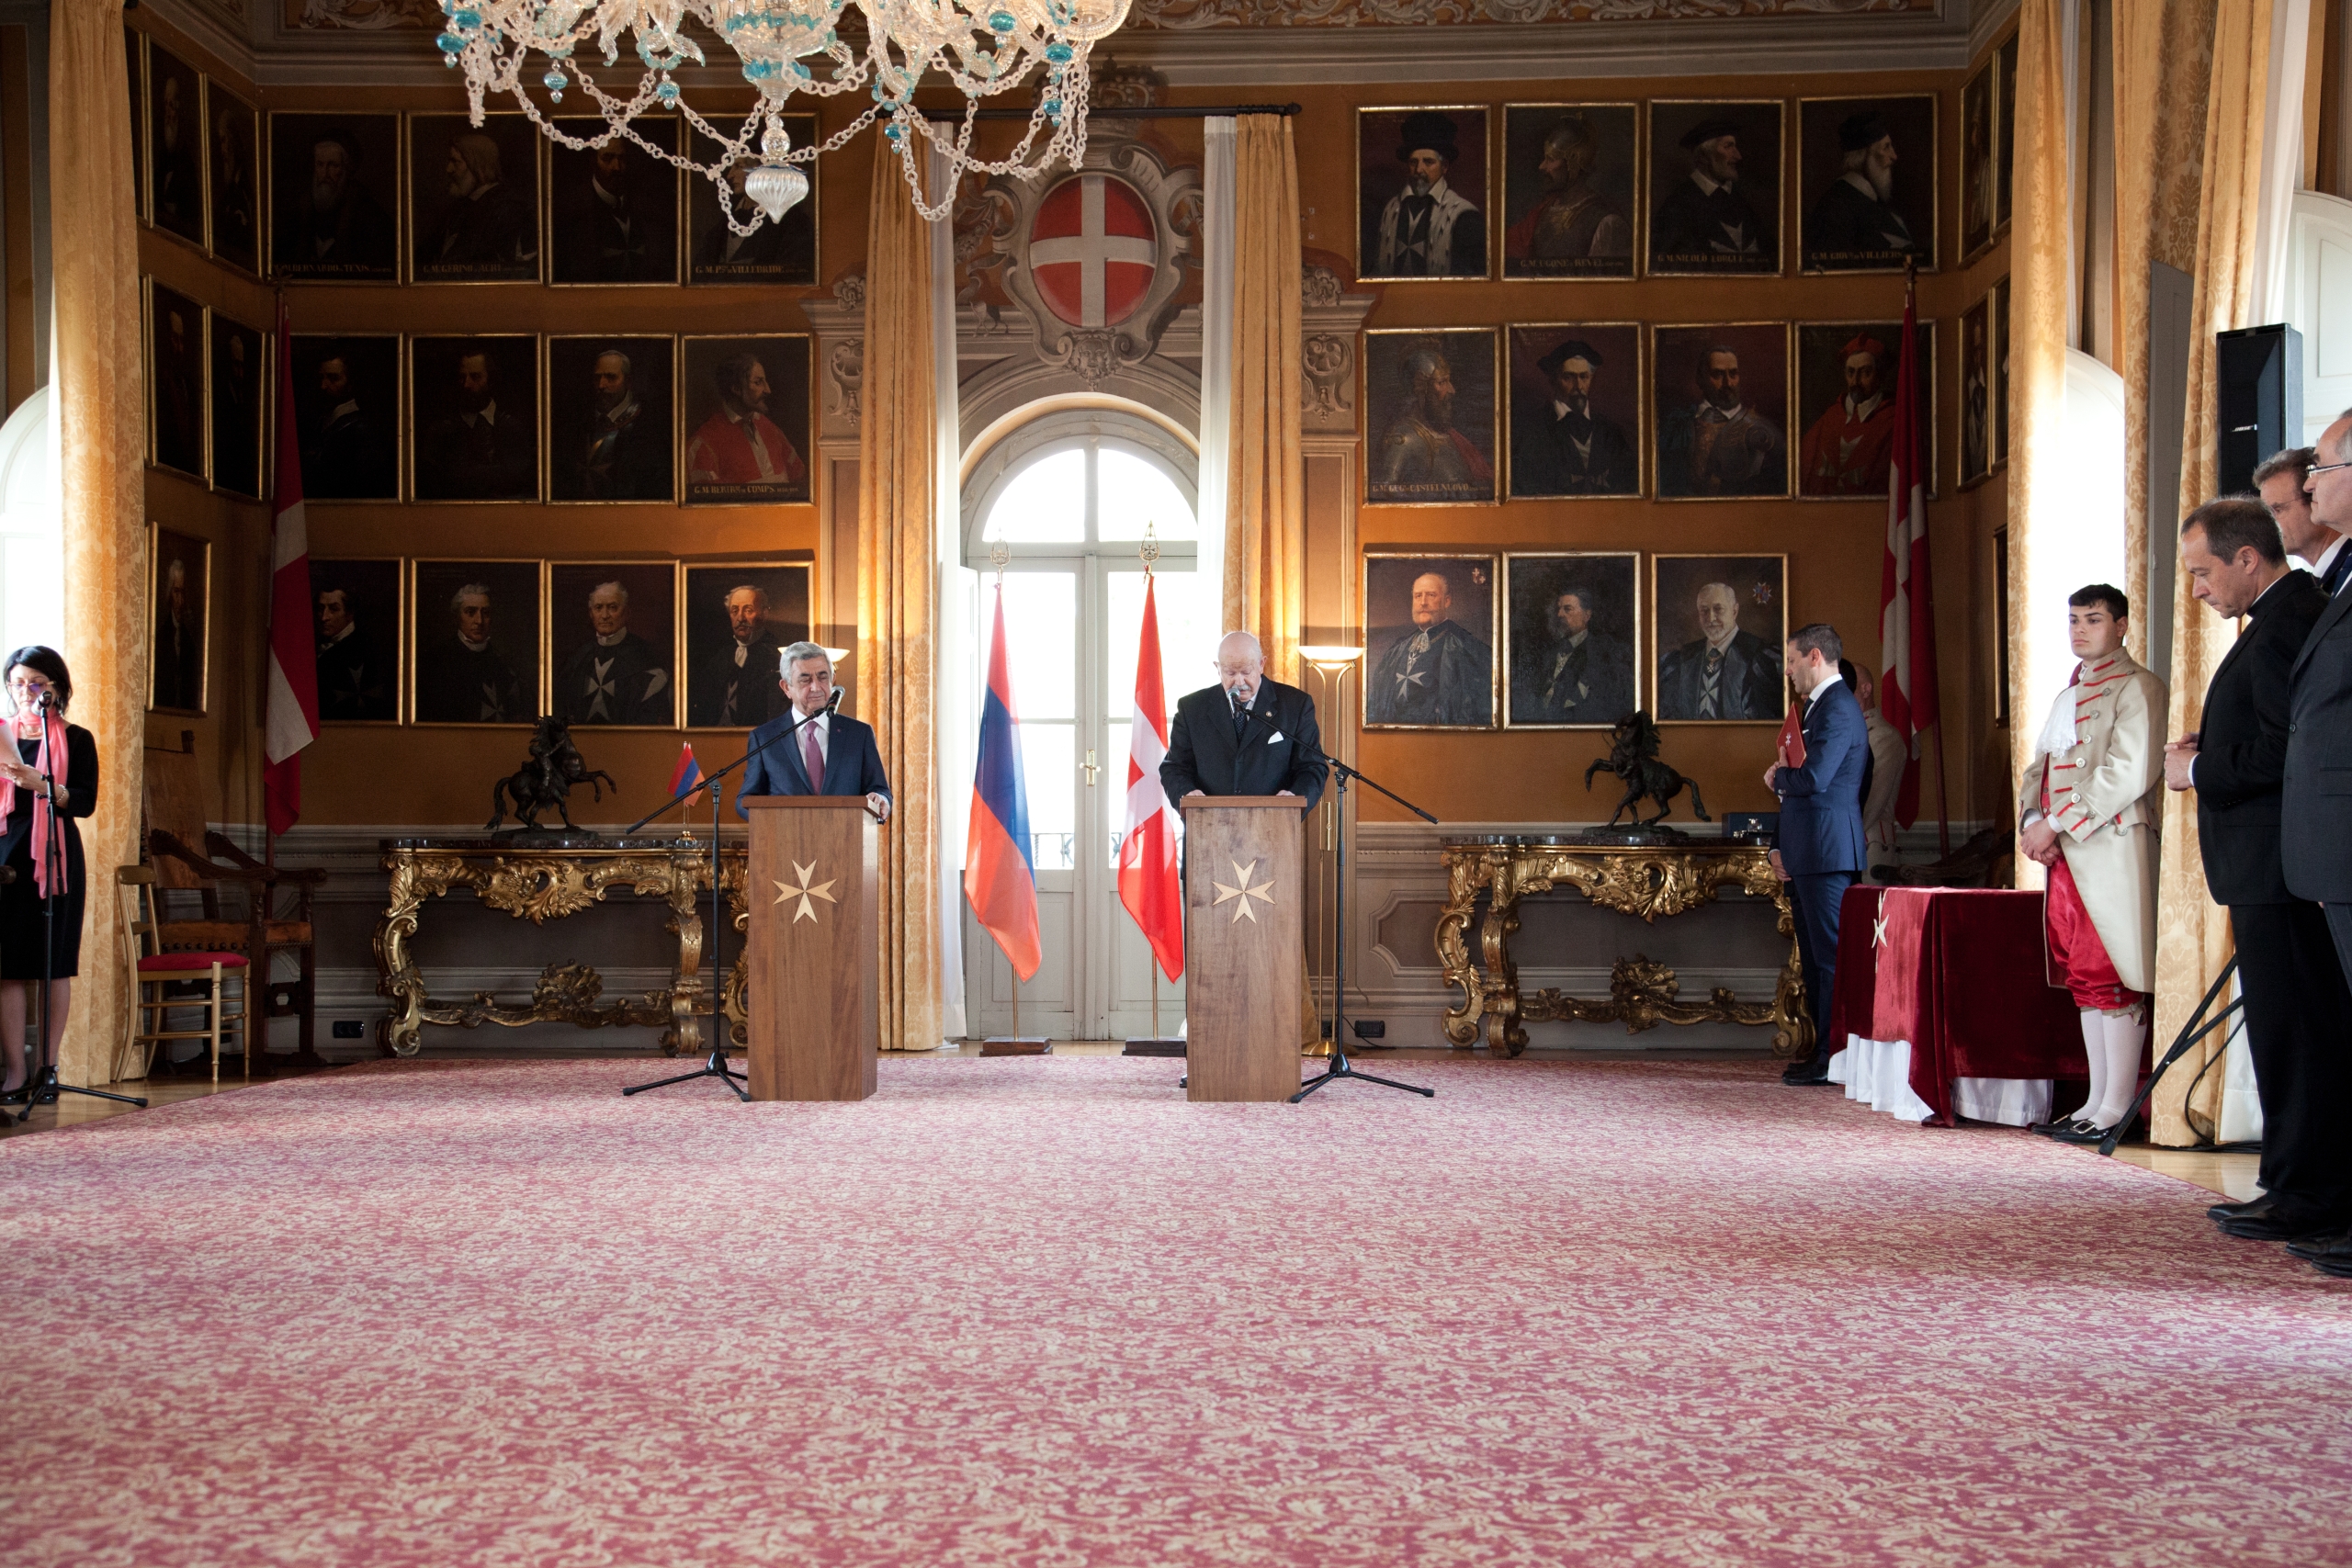 Official Visit of the President of Armenia received by the Lieutenant of the Grand Master Fra’ Giacomo Dalla Torre